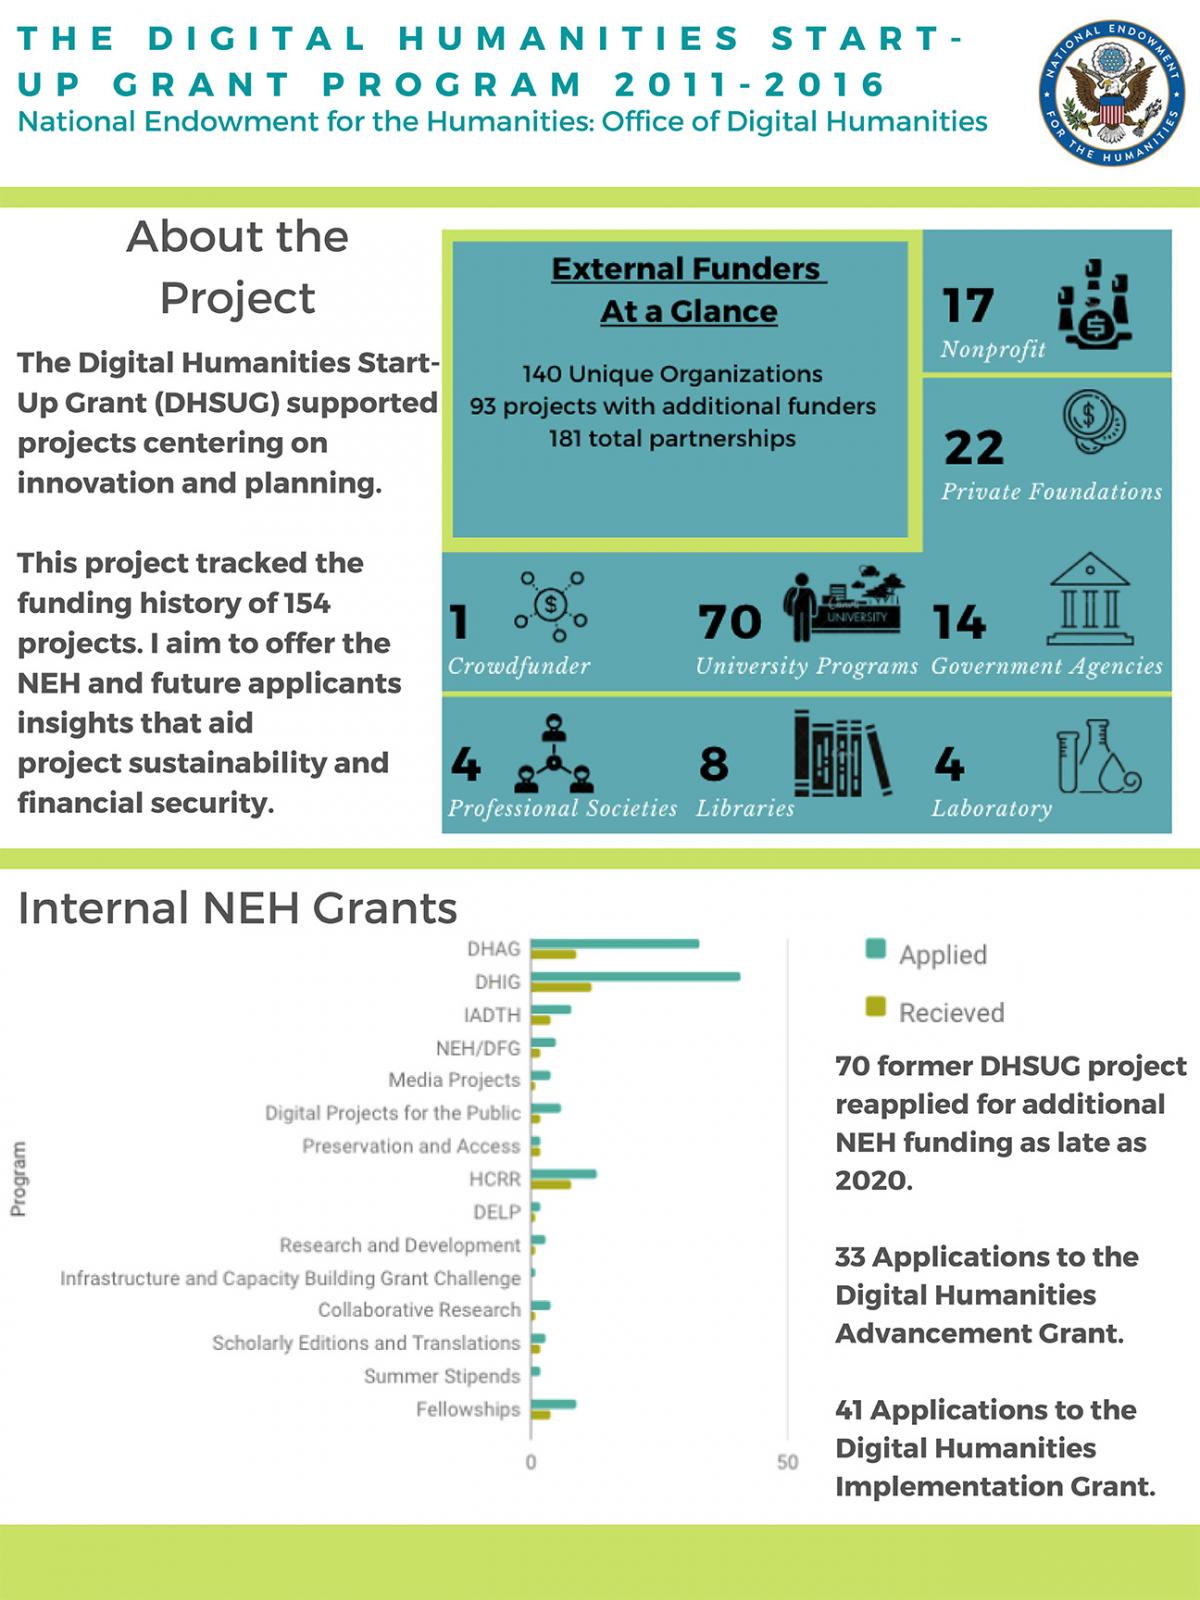 The Funding Lifecycles of Digital Humanities Start-Up Grant Projects  